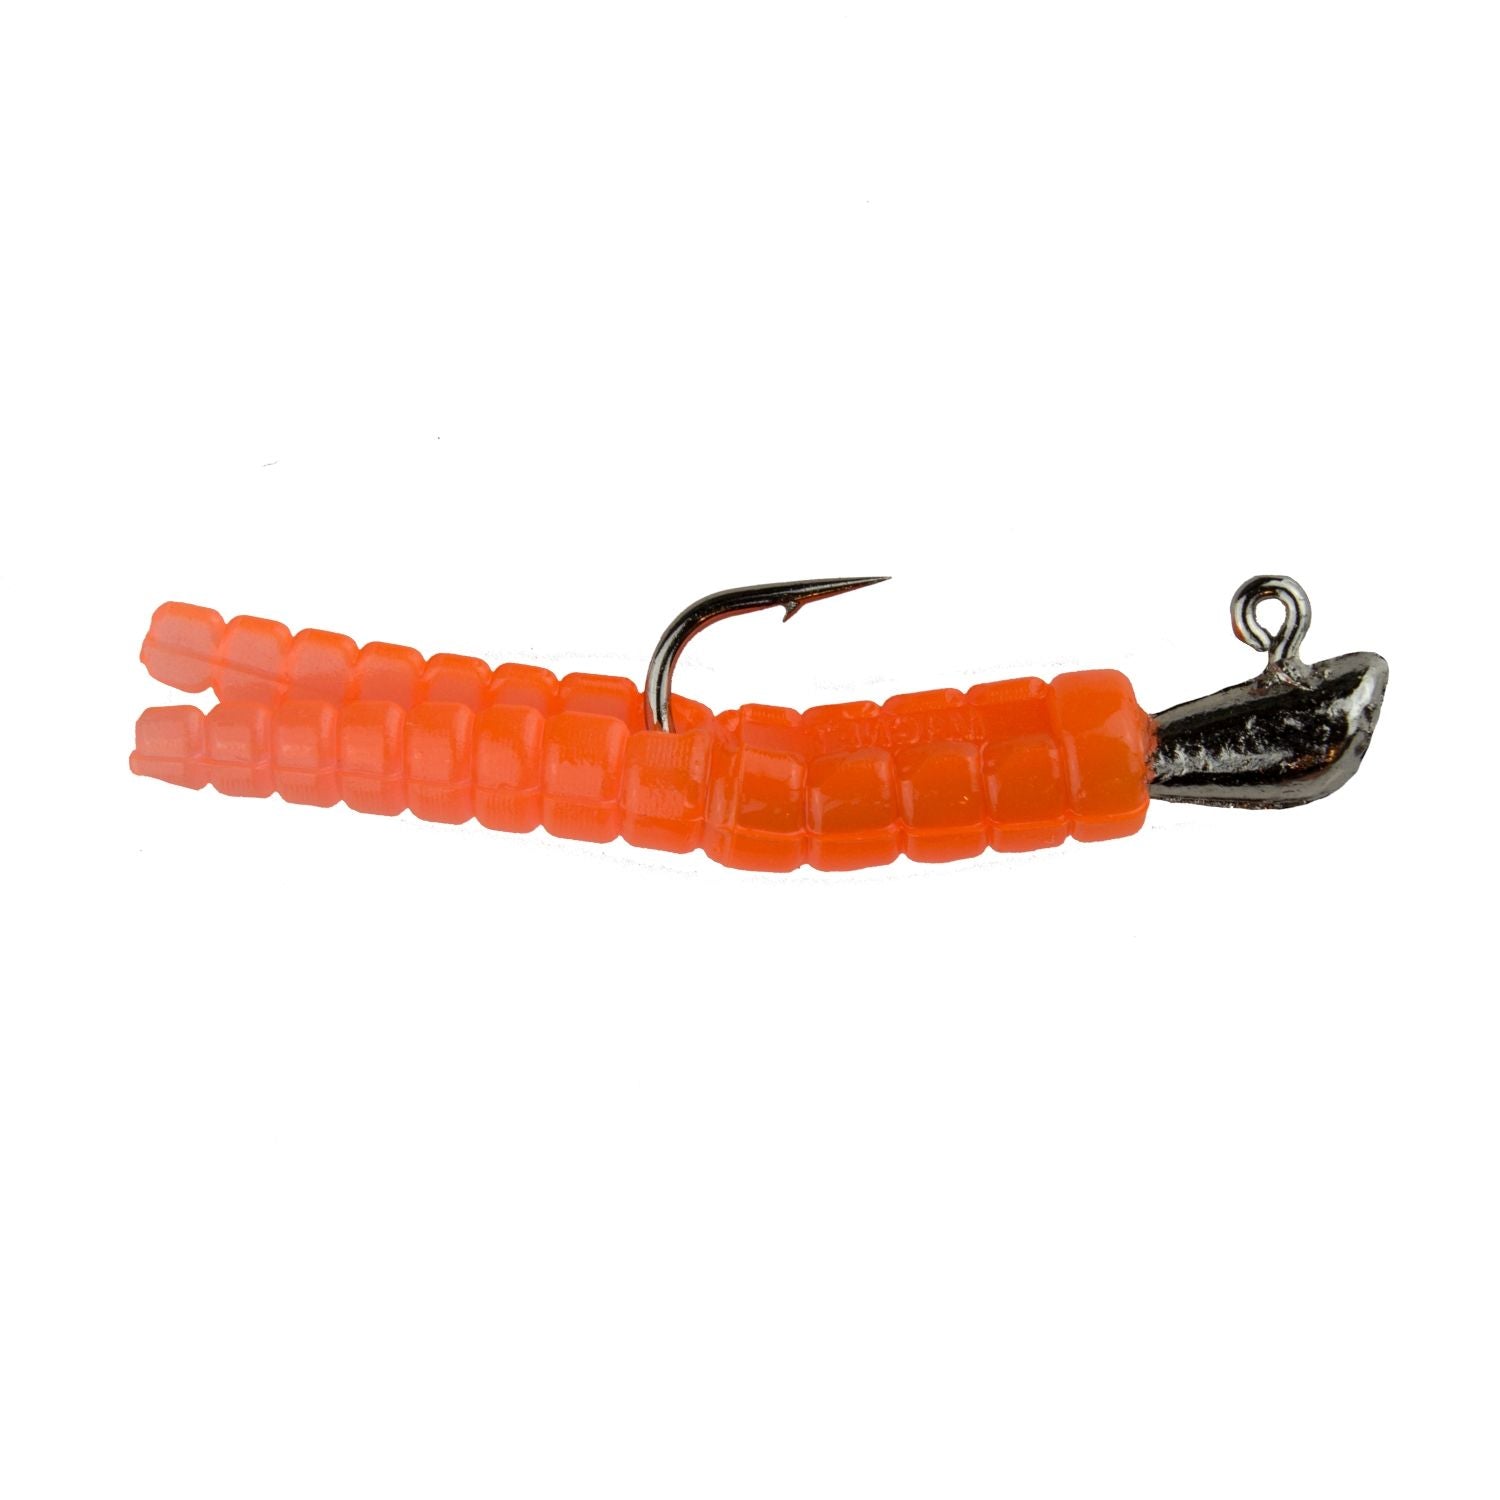 Trout Magnet 9pc. Split-tail grub Made in USA